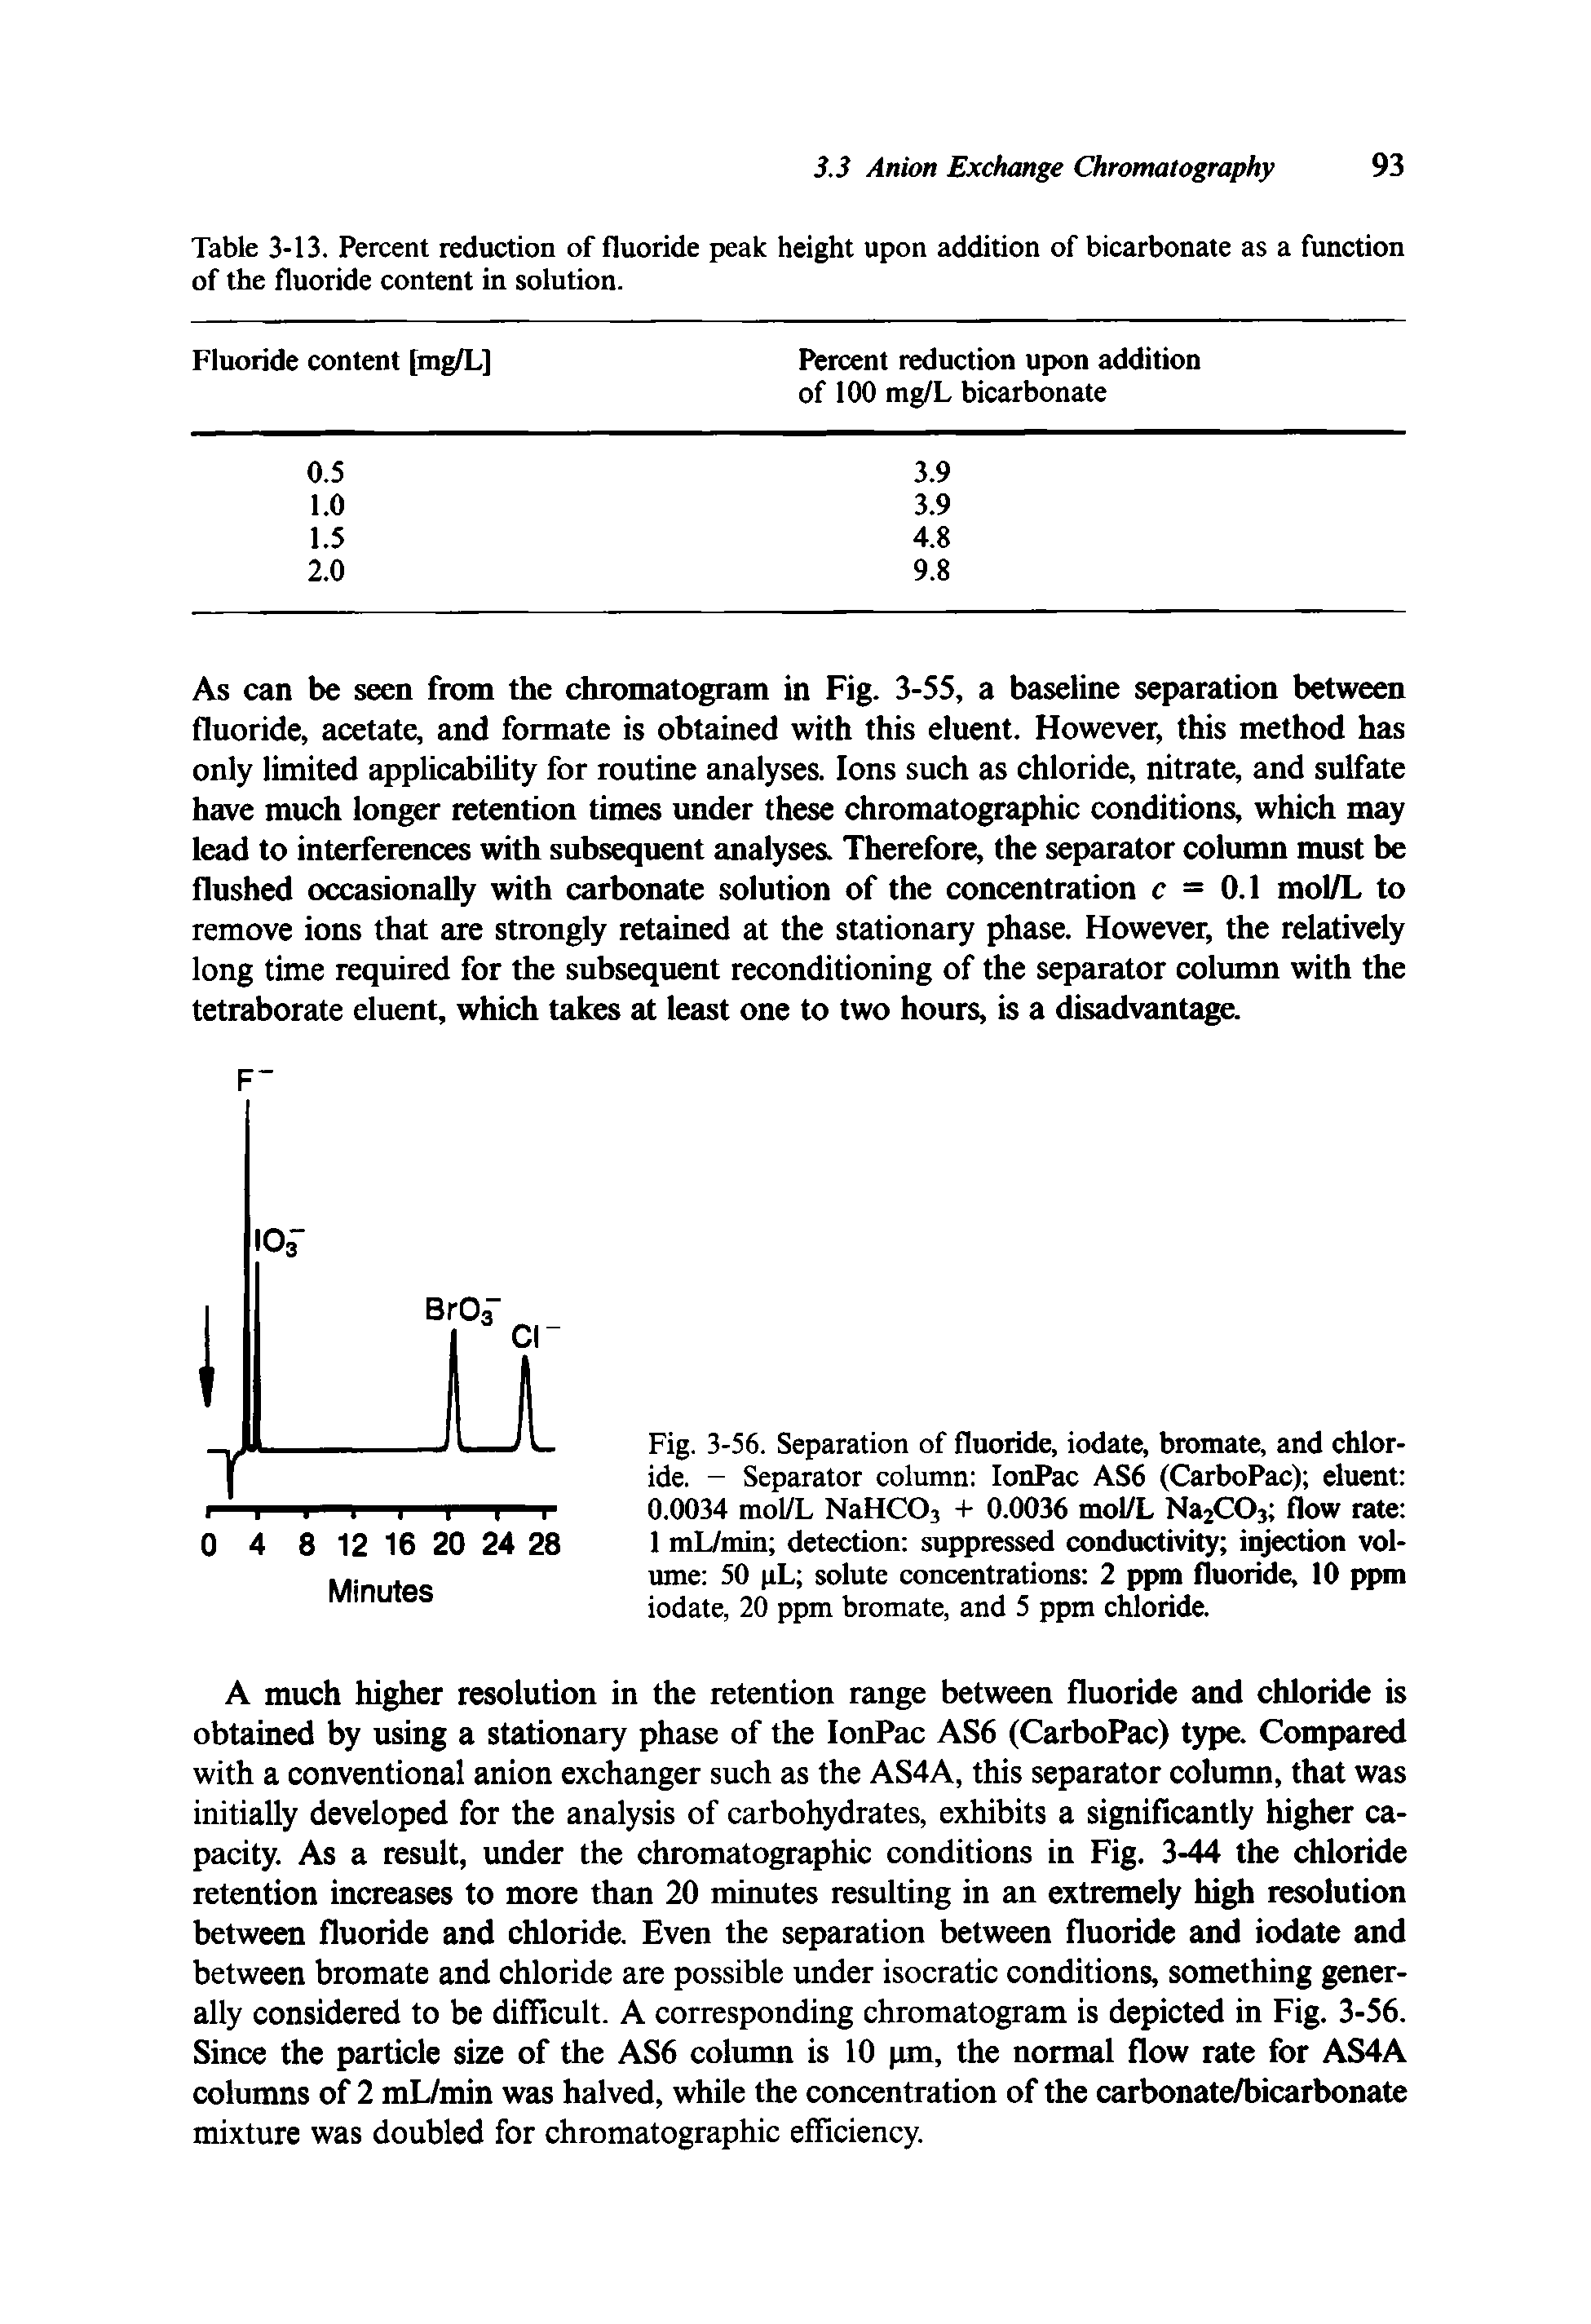 Fig. 3-56. Separation of fluoride, iodate, bromate, and chloride. - Separator column IonPac AS6 (CarboPac) eluent 0.0034 mol/L NaHCO, + 0.0036 mol/L Na2C03 flow rate 1 mL/min detection suppressed conductivity injection volume 50 pL solute concentrations 2 ppm fluoride, 10 ppm iodate, 20 ppm bromate, and 5 ppm chloride.